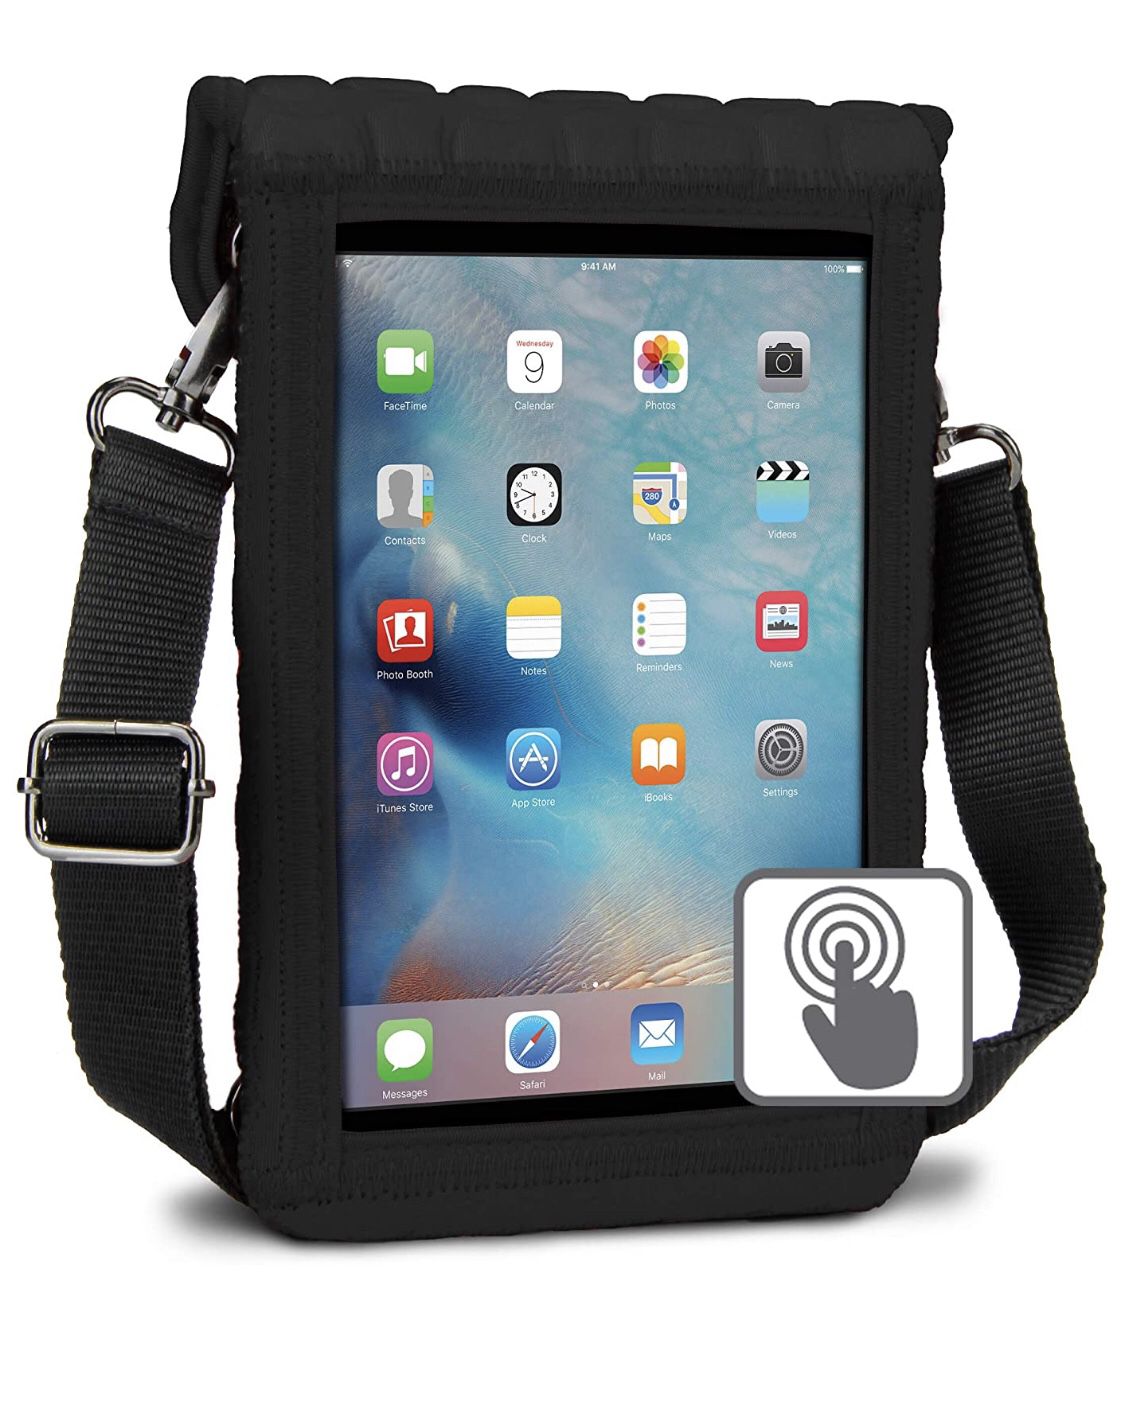 tablet case Color Black Material Neoprene Item Dimensions LxWxH 9.75 x 7 x 1.25 inches Brand USA Gear Item Weight 176.9 Grams